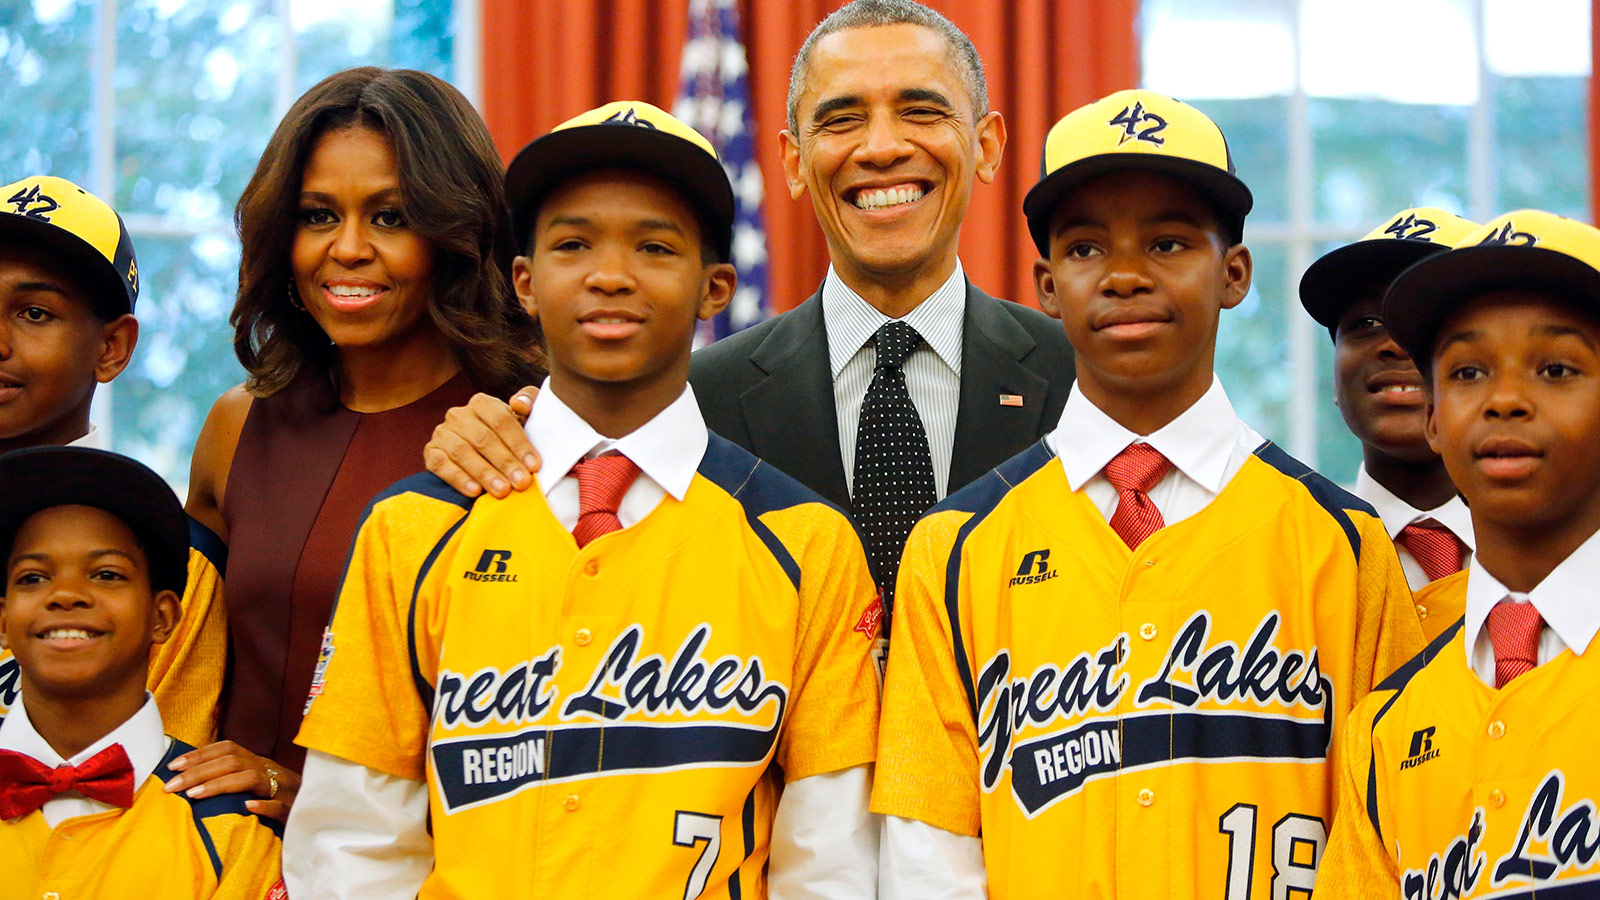 U.S. President Barack Obama and first lady Michelle Obama welcome members of the Jackie Robinson West All Stars Little League baseball team, including DJ Butler (bottom L), Lawrence Noble (#7), Eddie King (#18) and Jaheim Benton (far R), from Chicago in the Oval Office at the White House in Washington November 6, 2014. The team won the U.S. bracket of the Little League World Series this summer, before falling in the finals to the Seoul Little League of Seoul, South Korea.